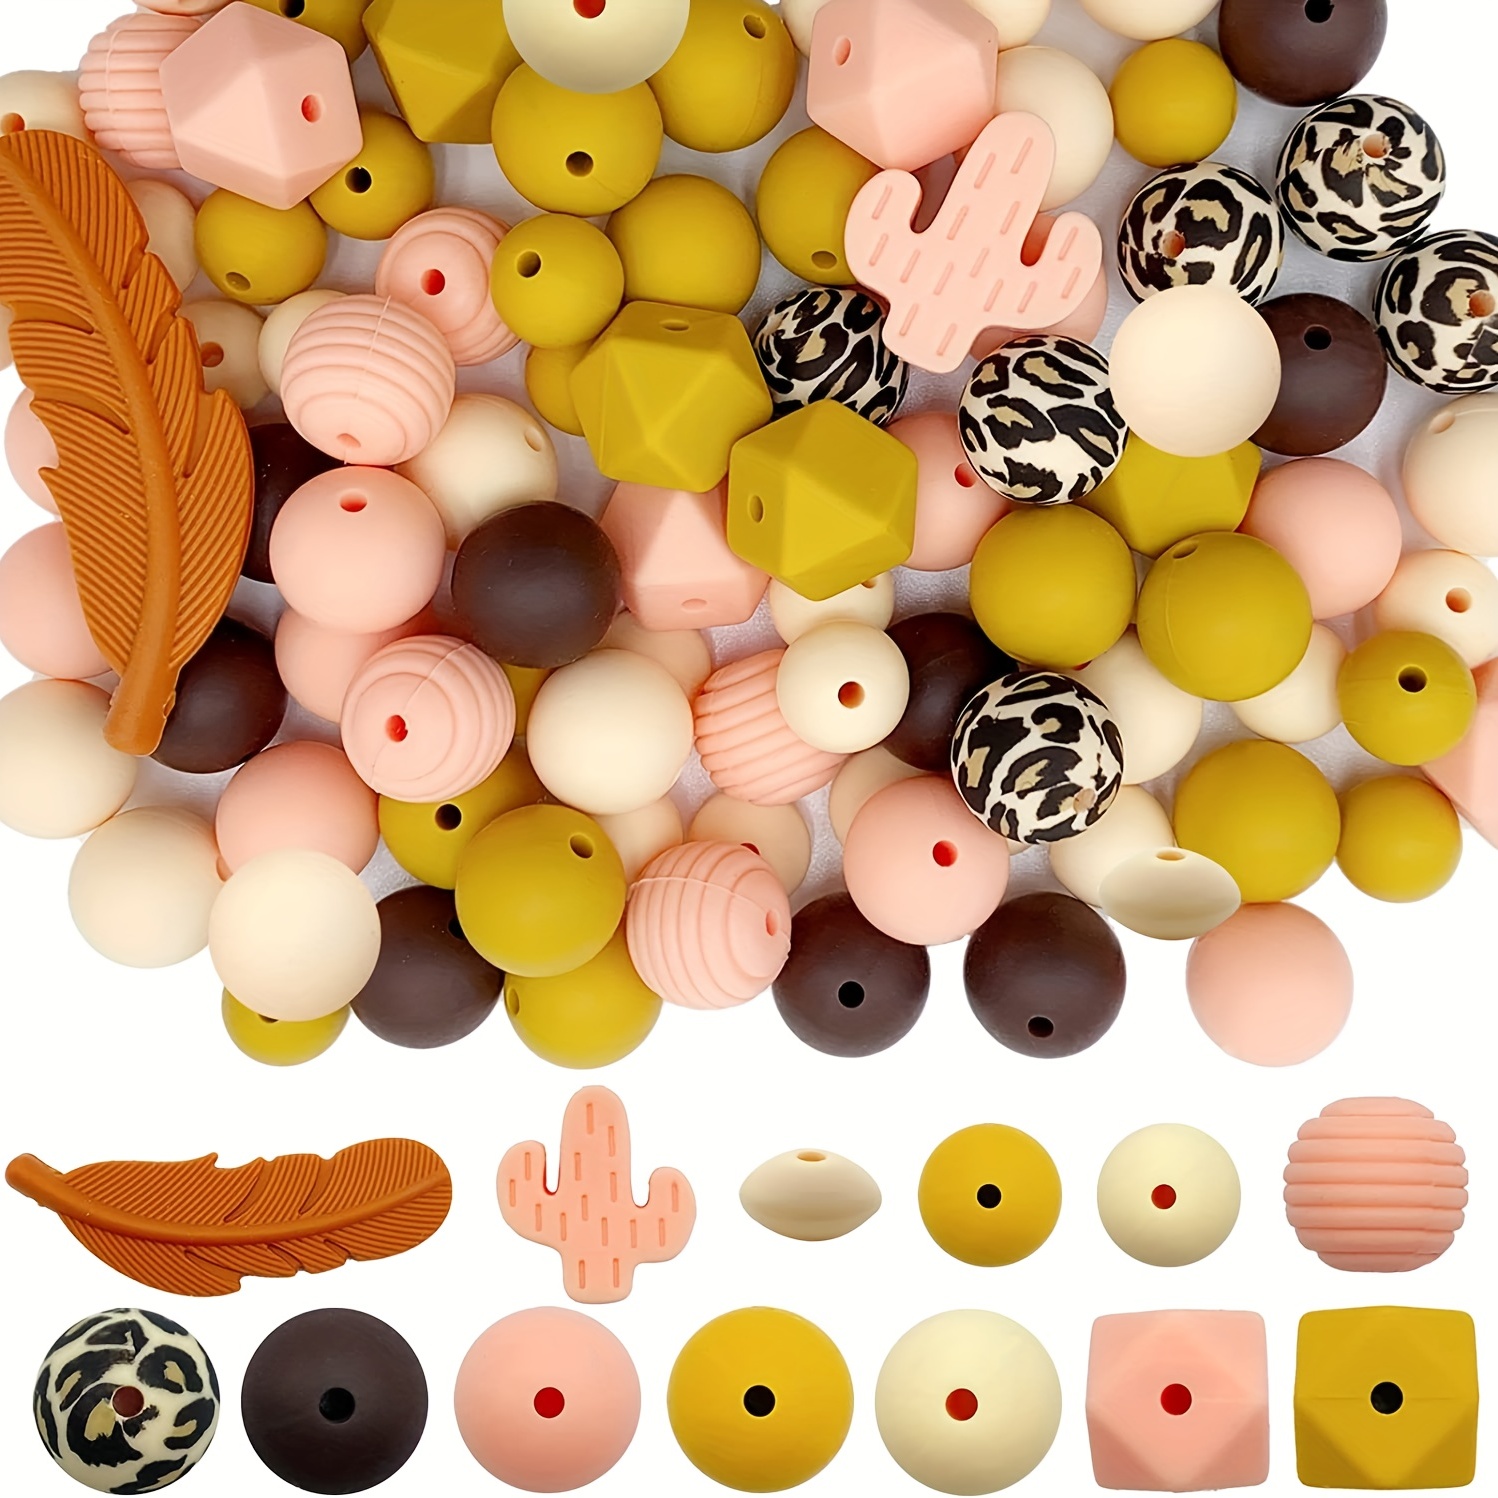  BOZUAN 225 Silicone Beads for Keychain Making Kit, Multiple  Styles and Shapes Silicone Beads Bulk Rubber Beads for Keychains Making :  Arts, Crafts & Sewing